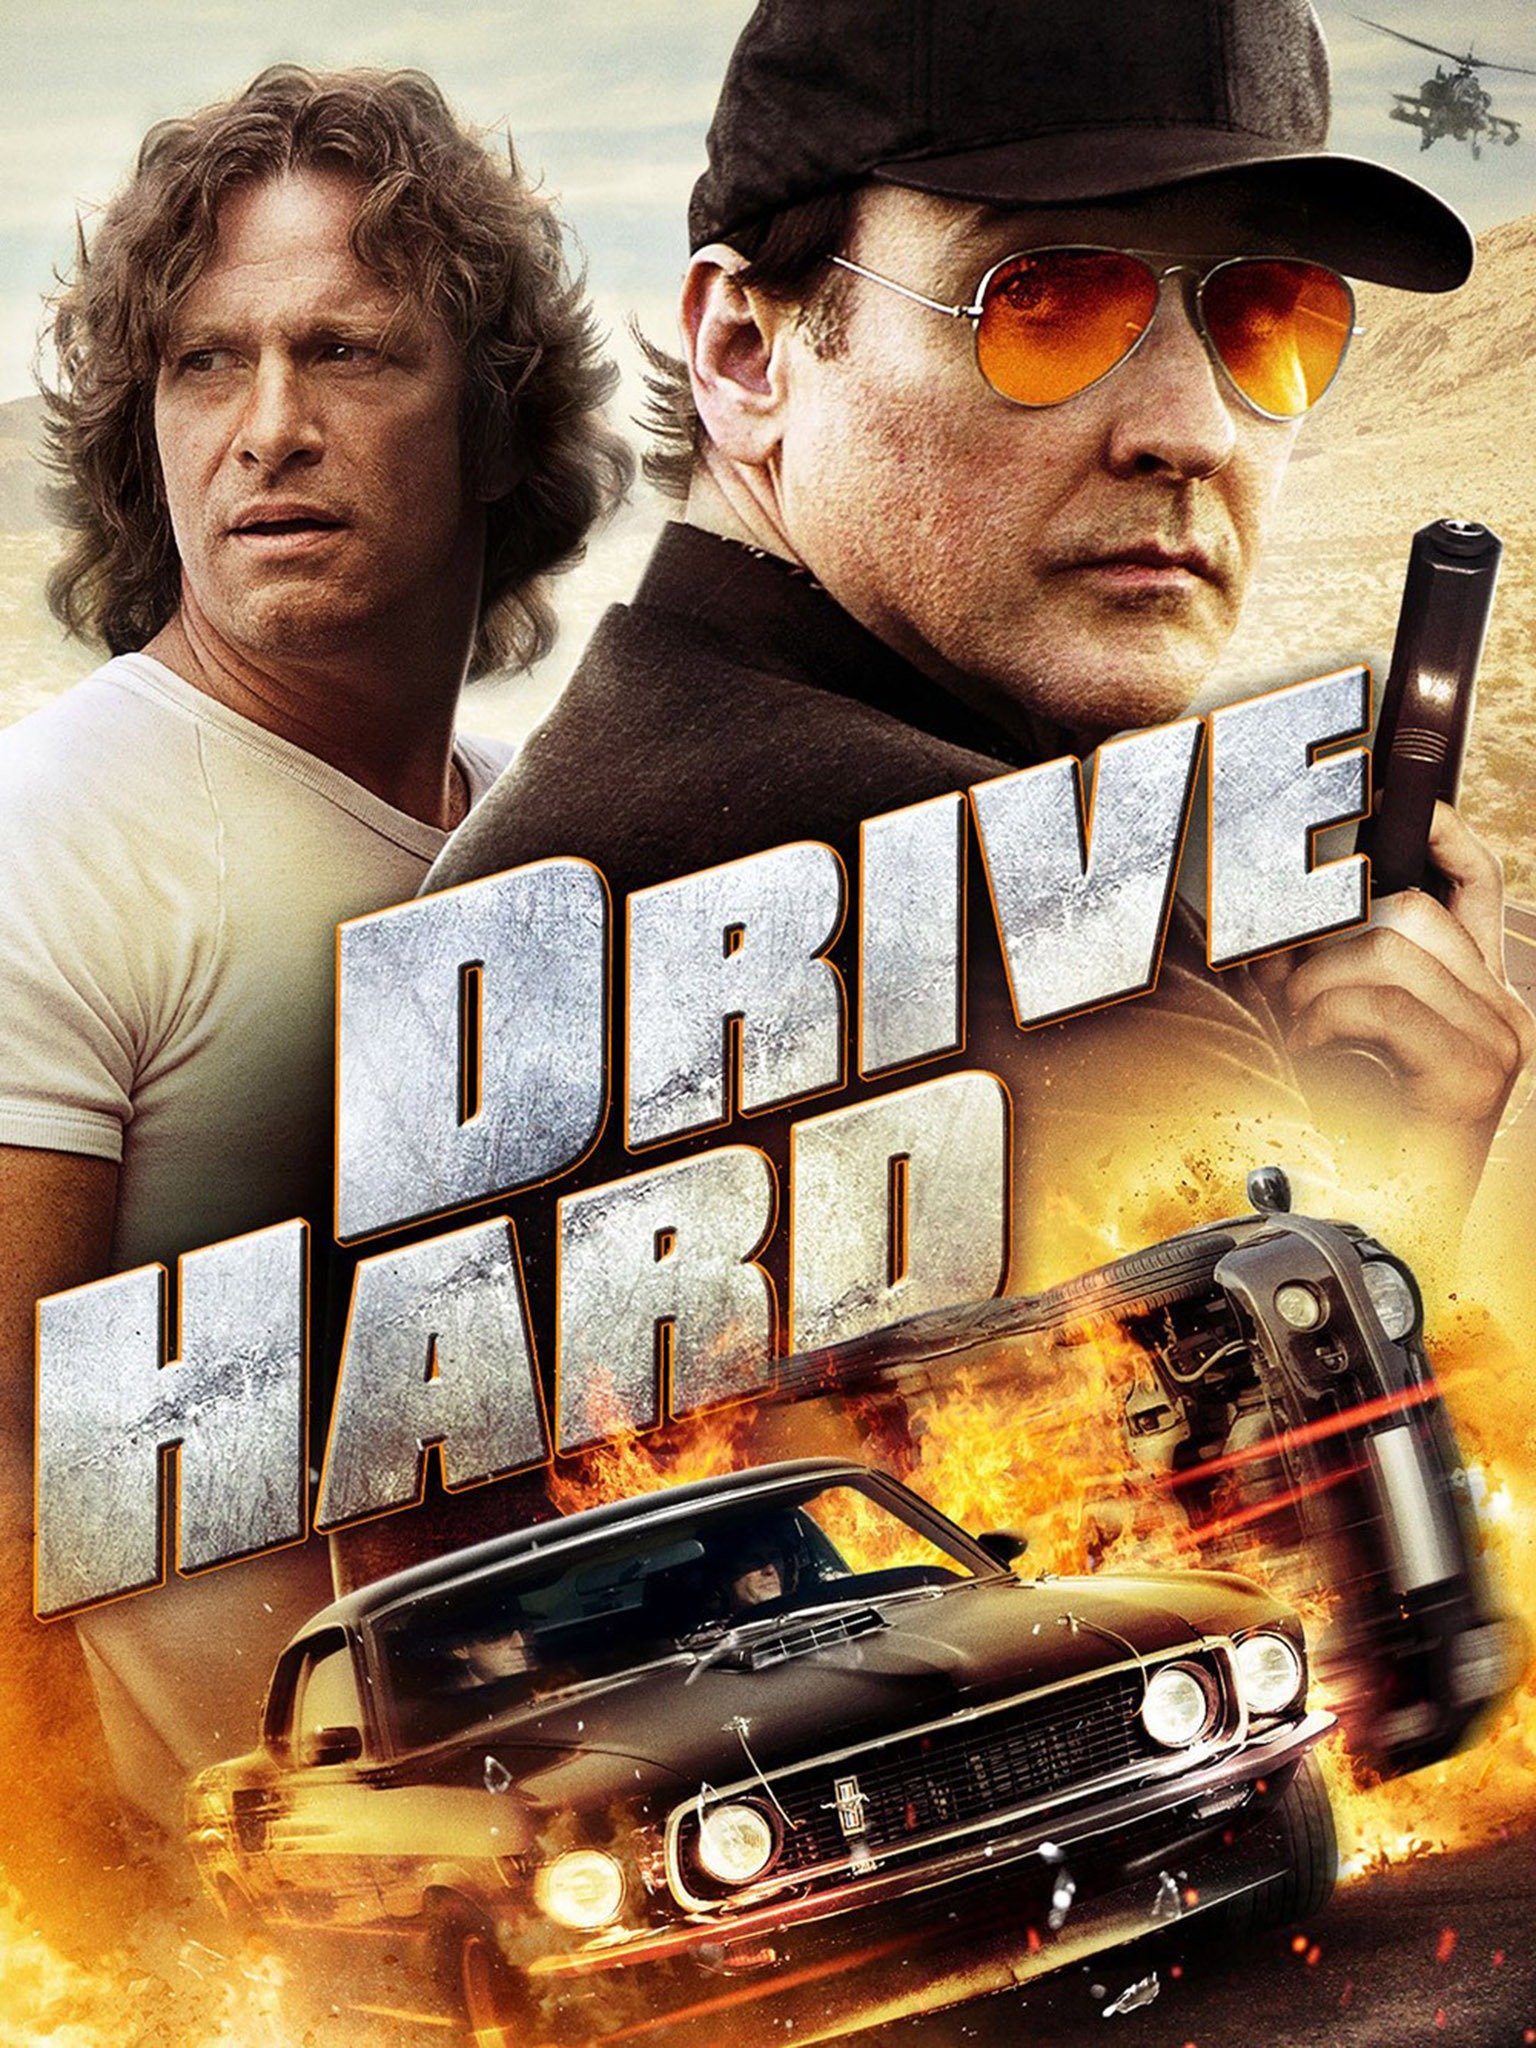 drive hard full movie review